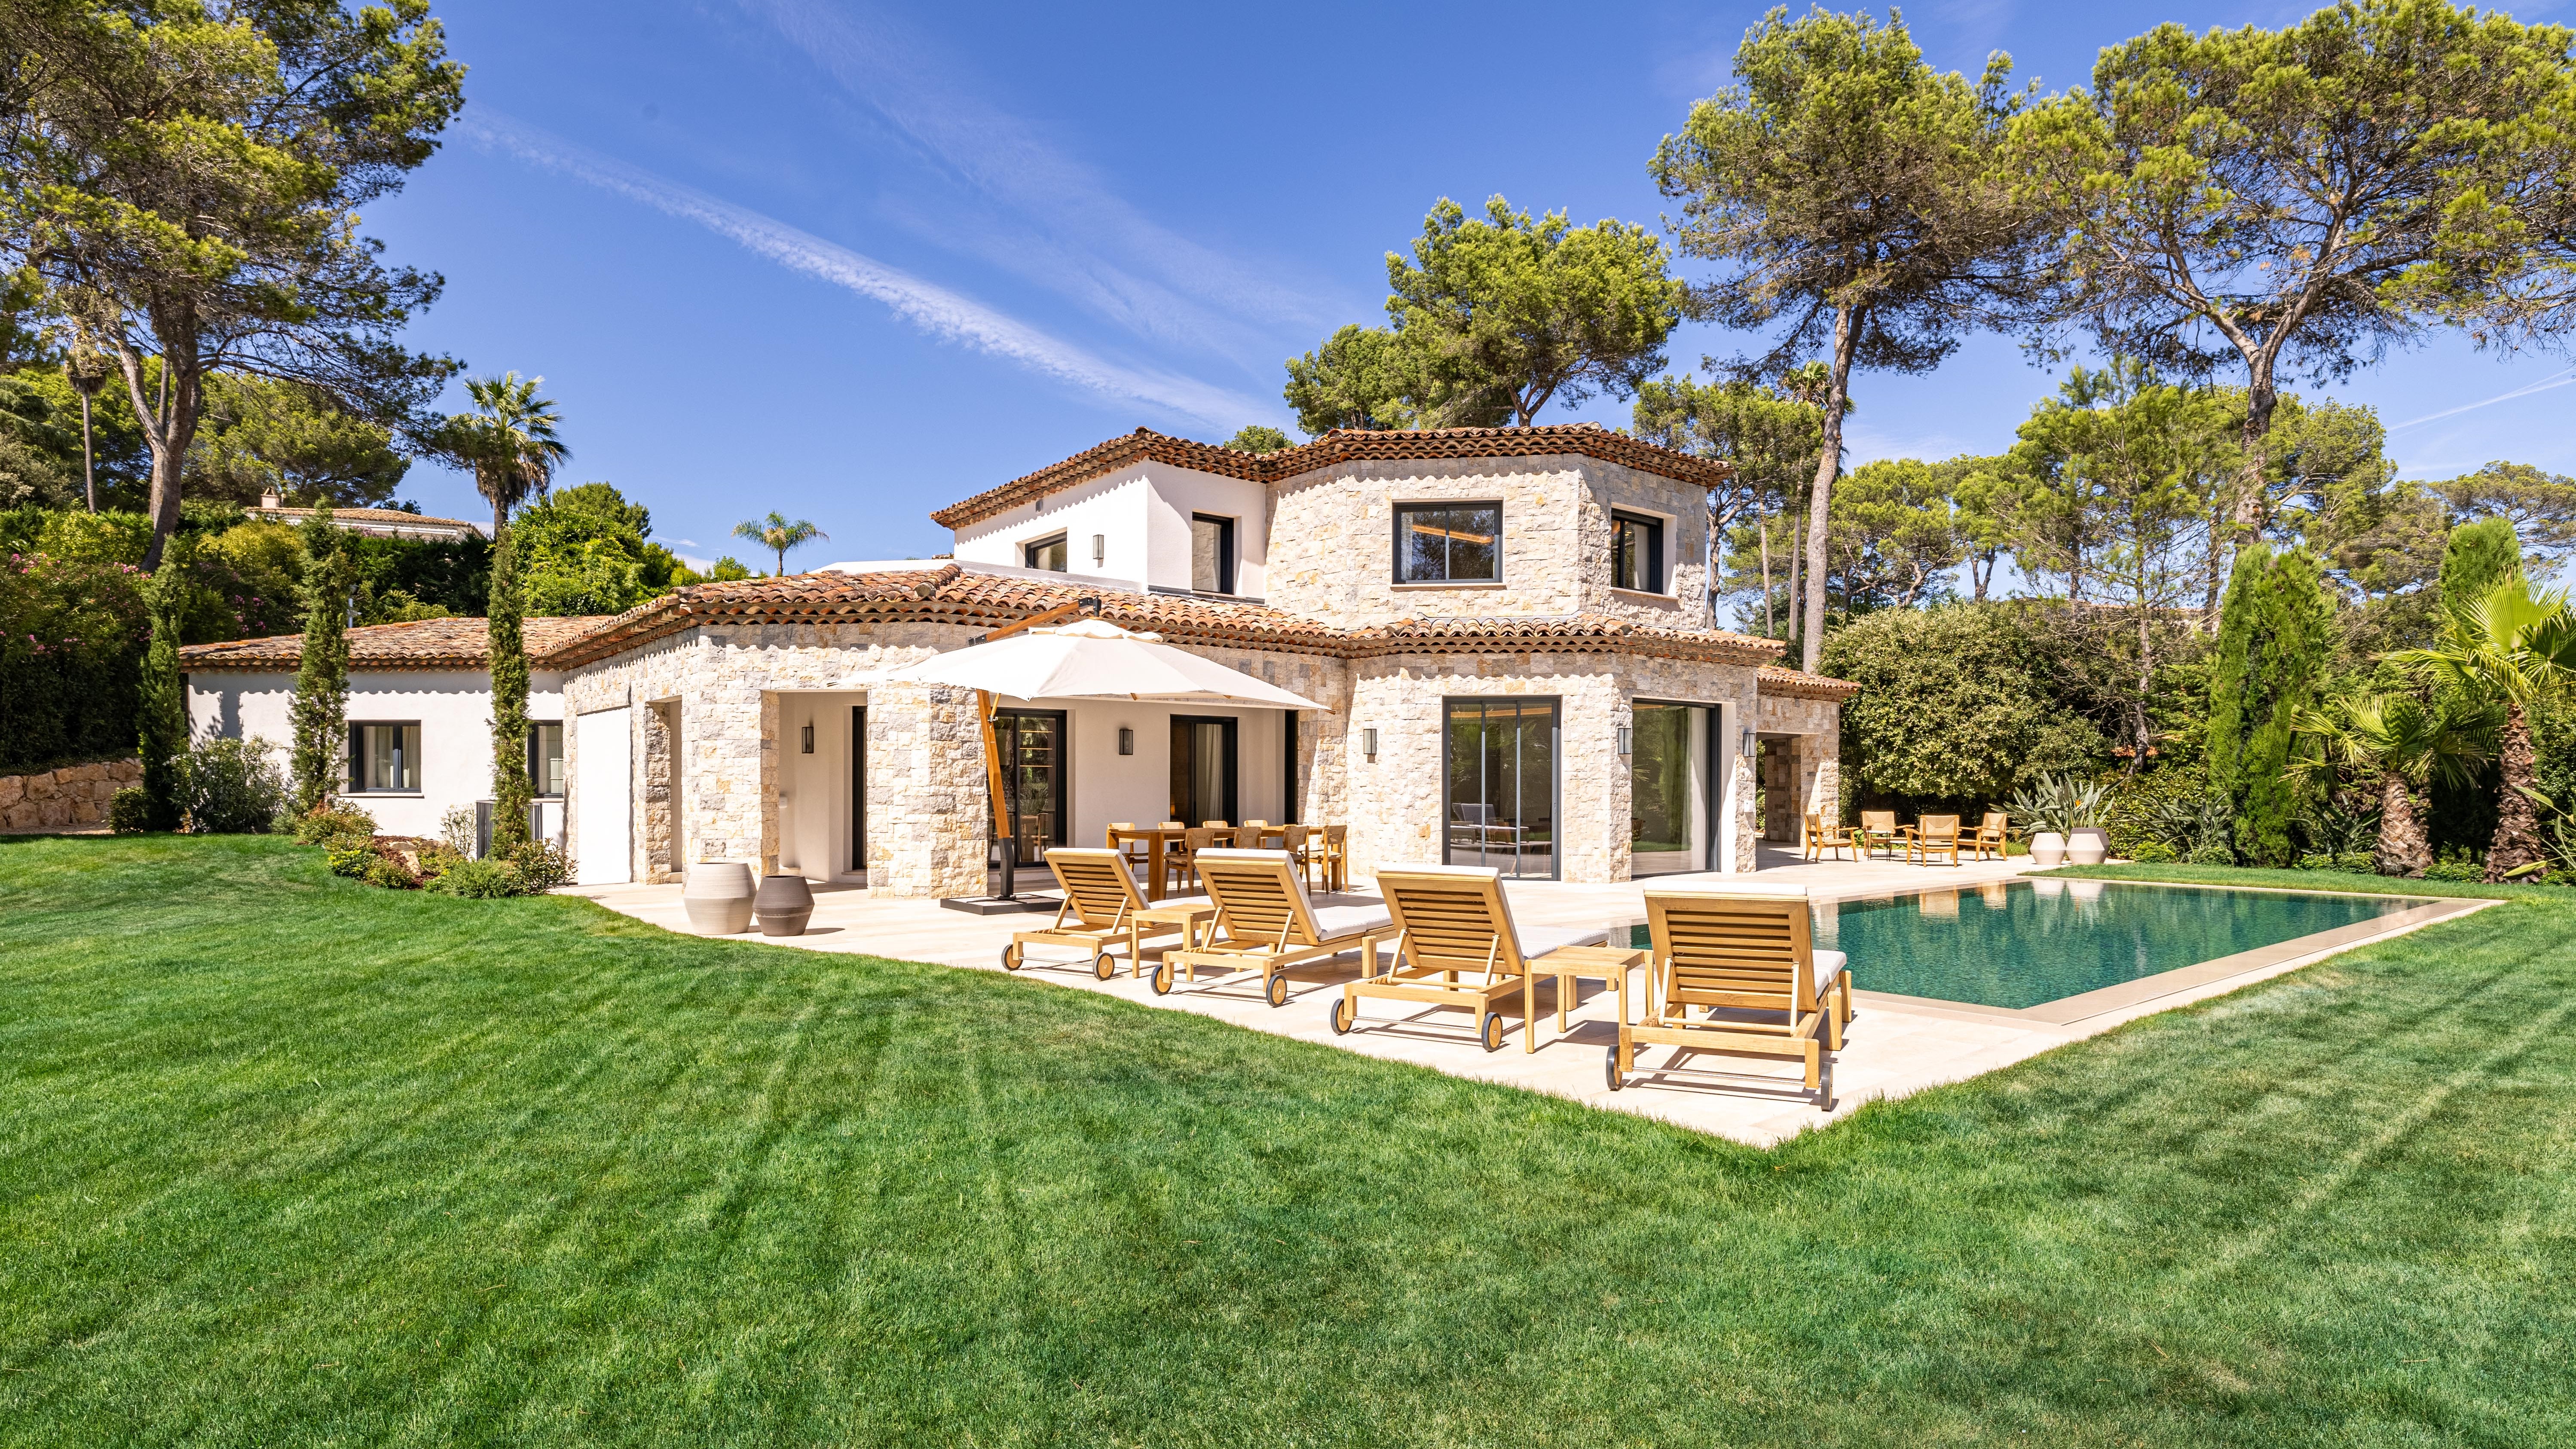 Luxury real estate Mougins. Agence Europa offers you for sale this luxury villa in Mougins